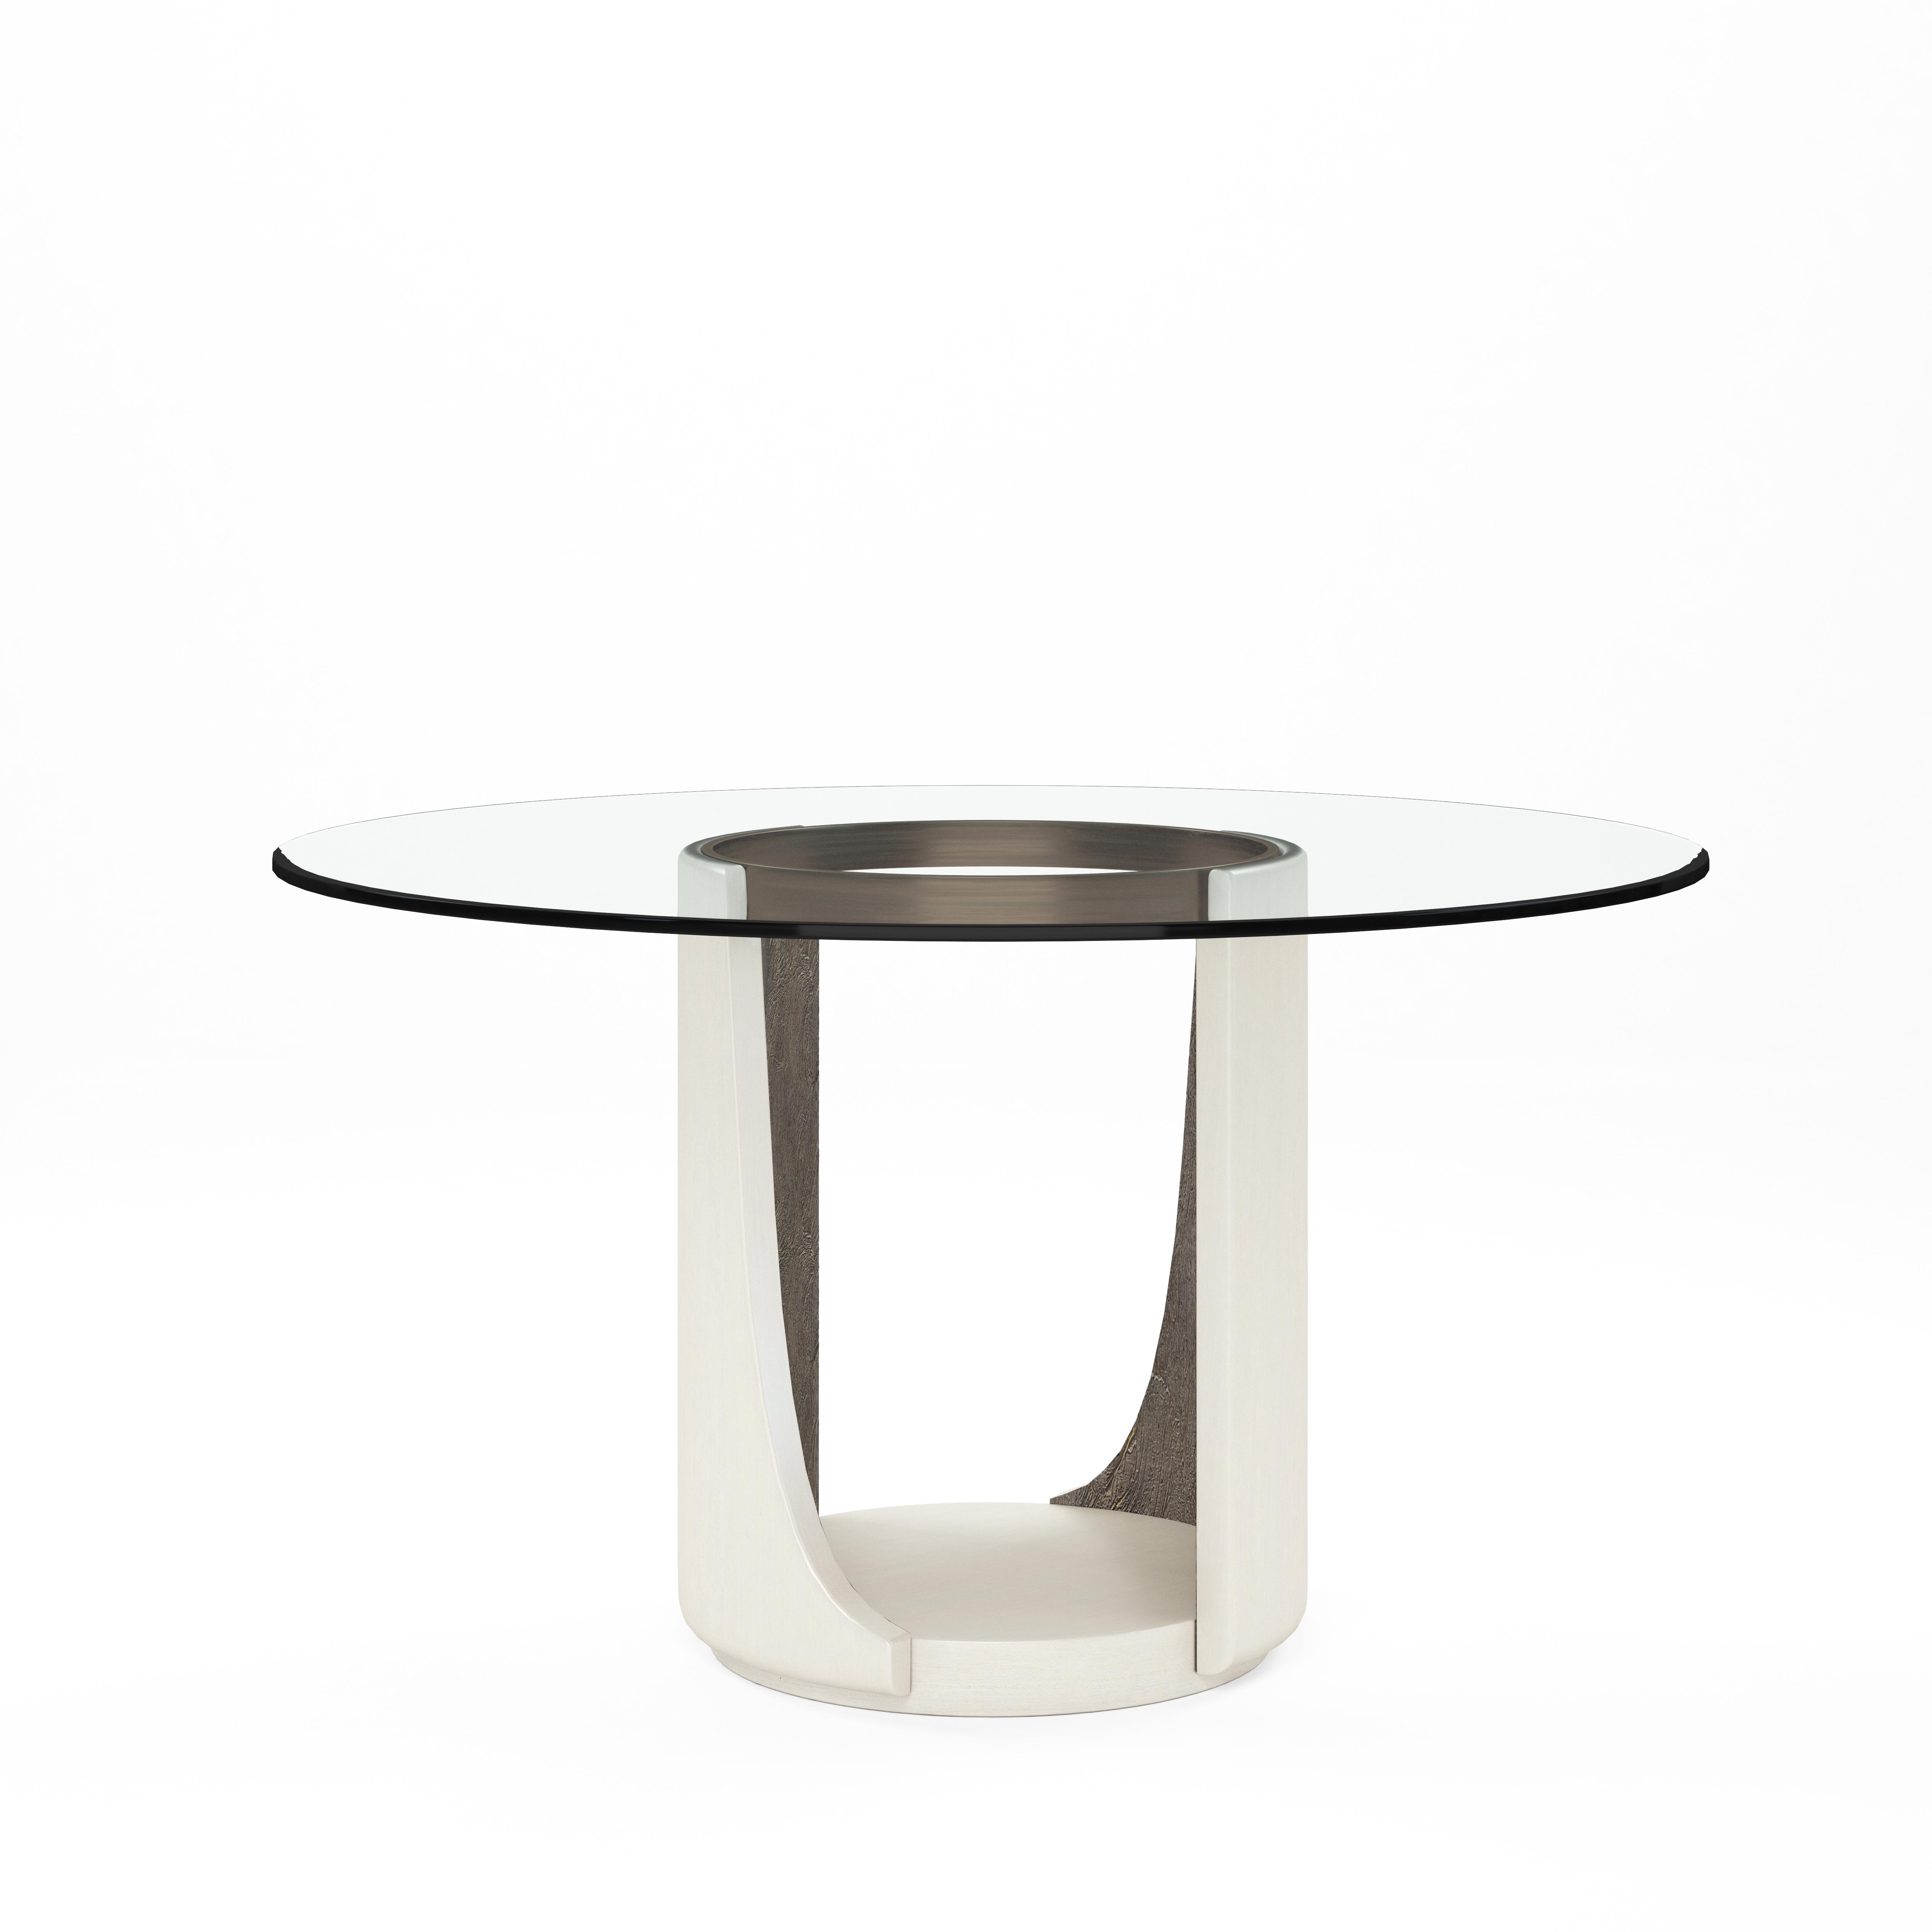 Modern, Casual Dining Table Blanc 289225-1040 in Beige 